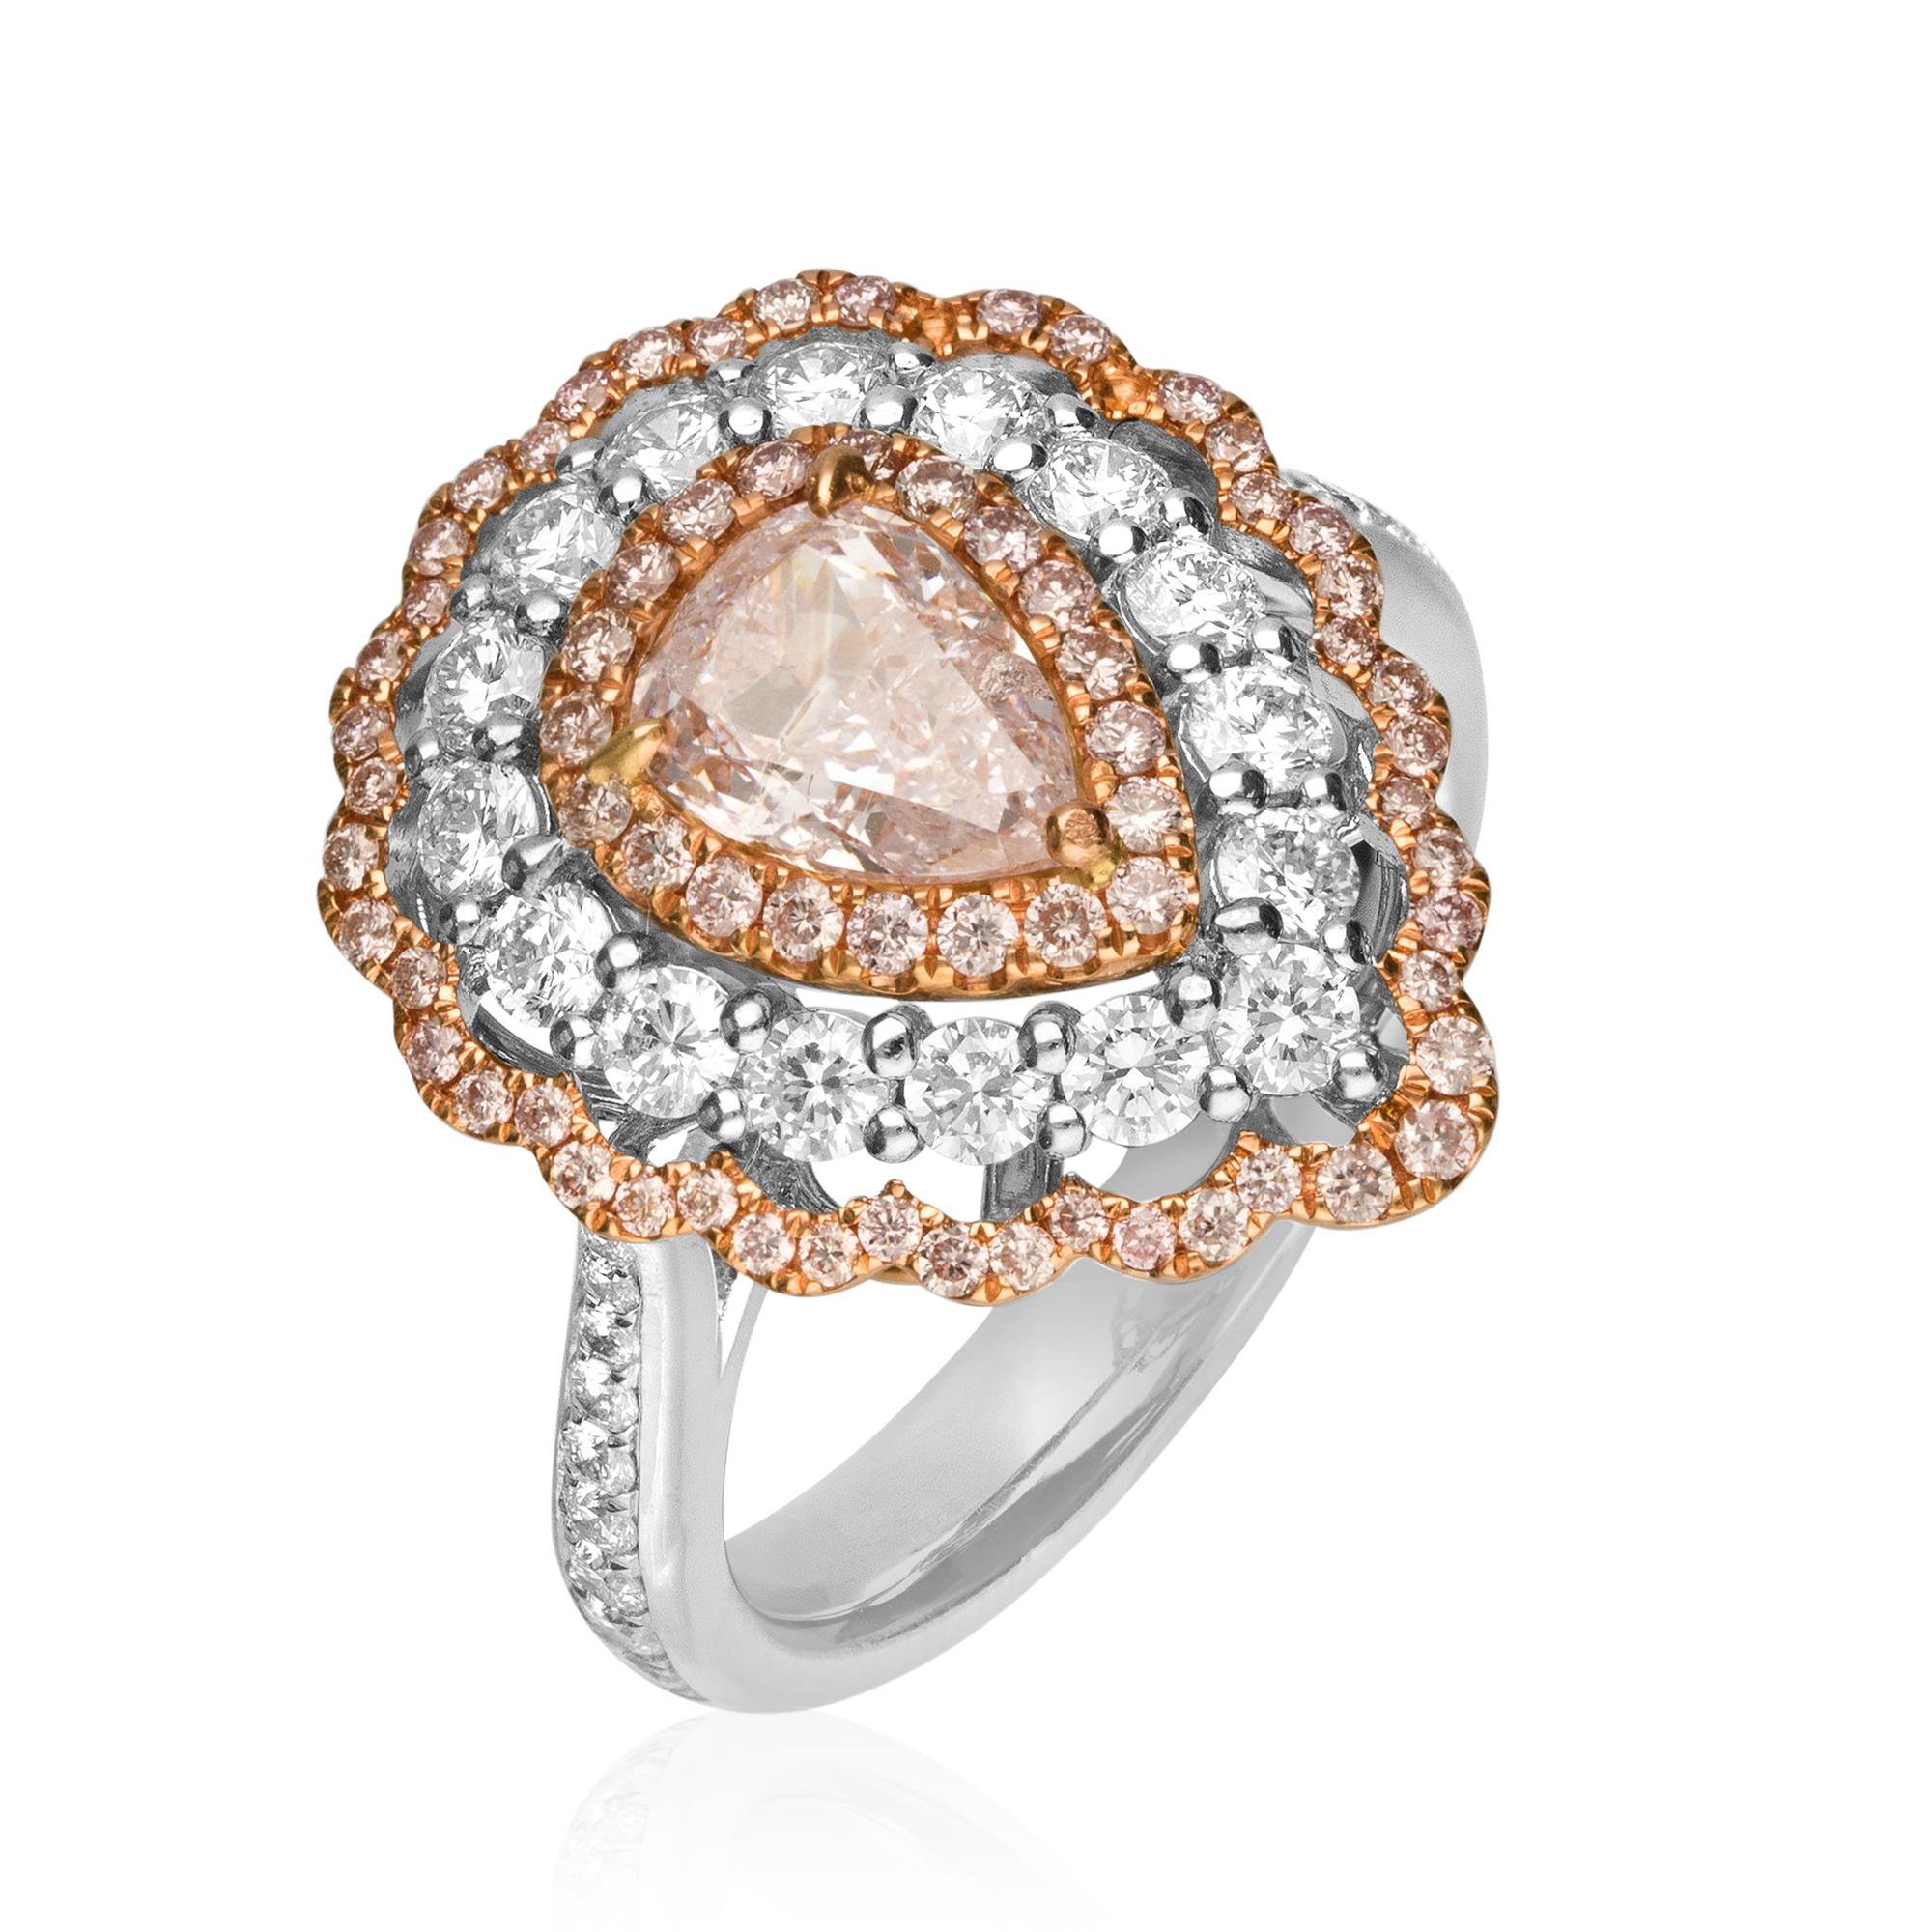 This beautiful Engagement ring is crafted in 18-karat Two Tone (Rose and White) gold. 
It features a GIA certified Pear shaped Natural Pink Diamond 1.01 Carat with I2 clarity, 69 Pink Diamonds 0.39 Carat and 34 Round white Diamonds 0.89 Carat.